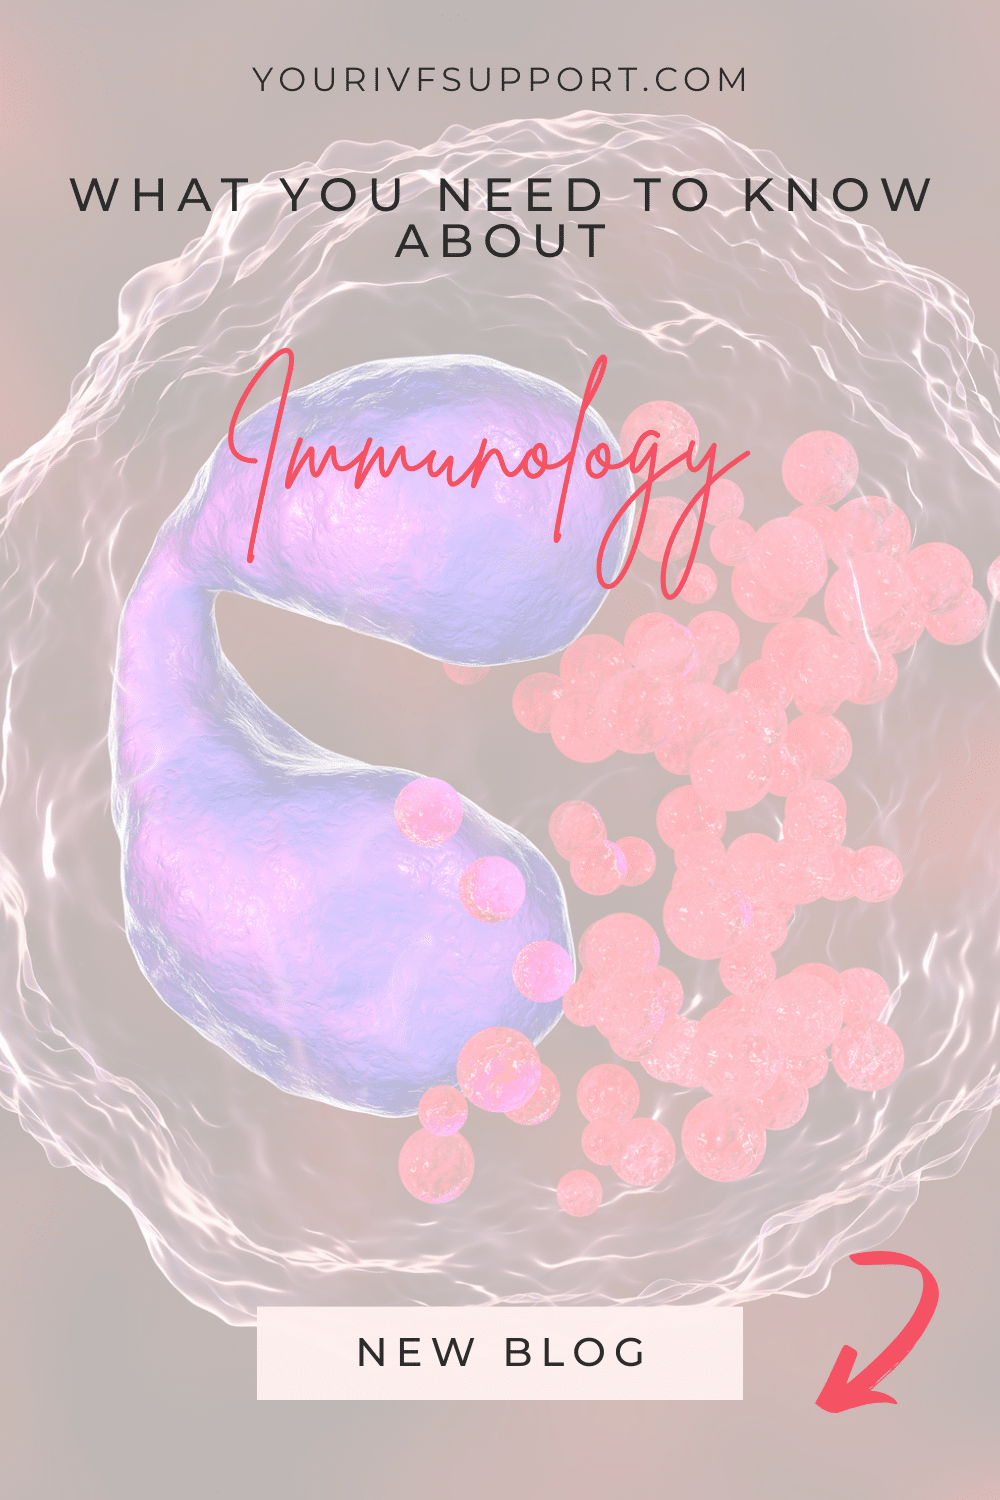 Immunology and Fertility: Understanding the Connection